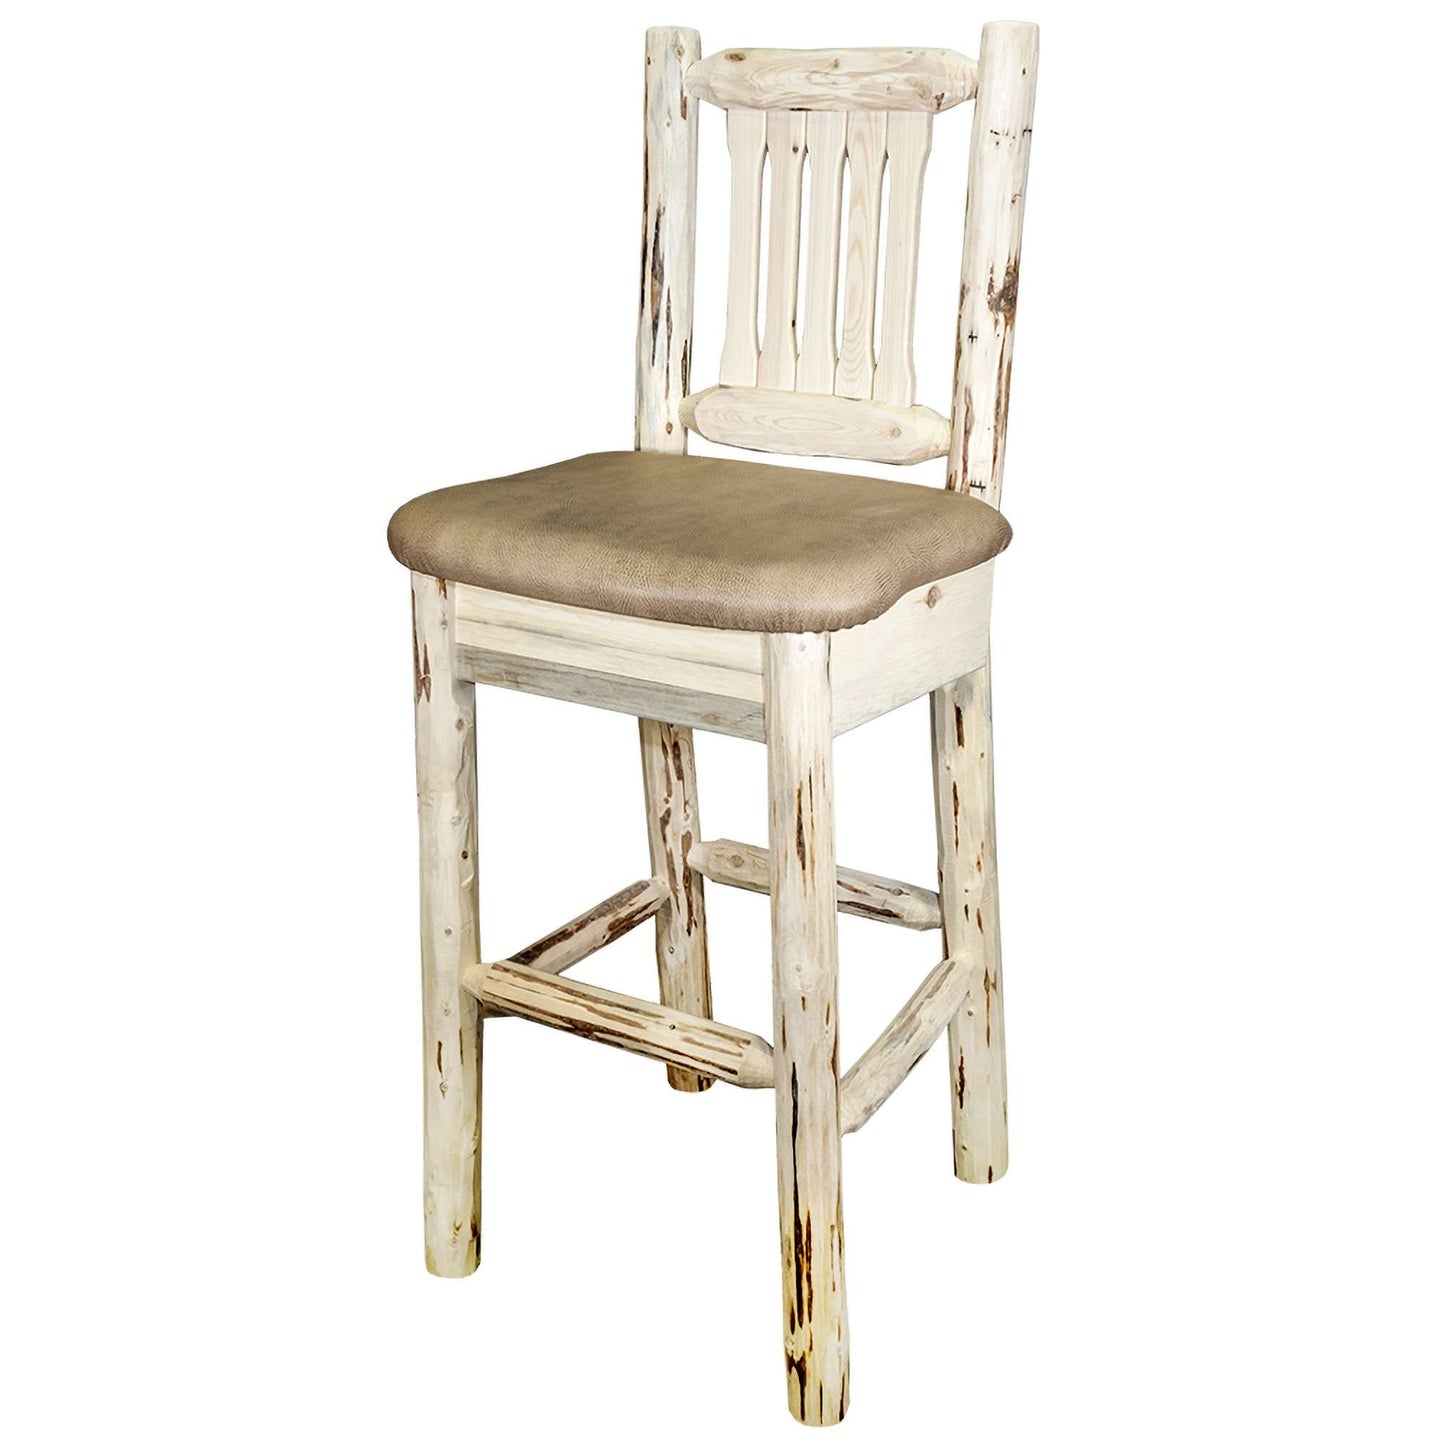 Montana Woodworks - Montana Collection Counter Height Barstool w/ Back - Buckskin Upholstery, Ready to Finish  - 38 in